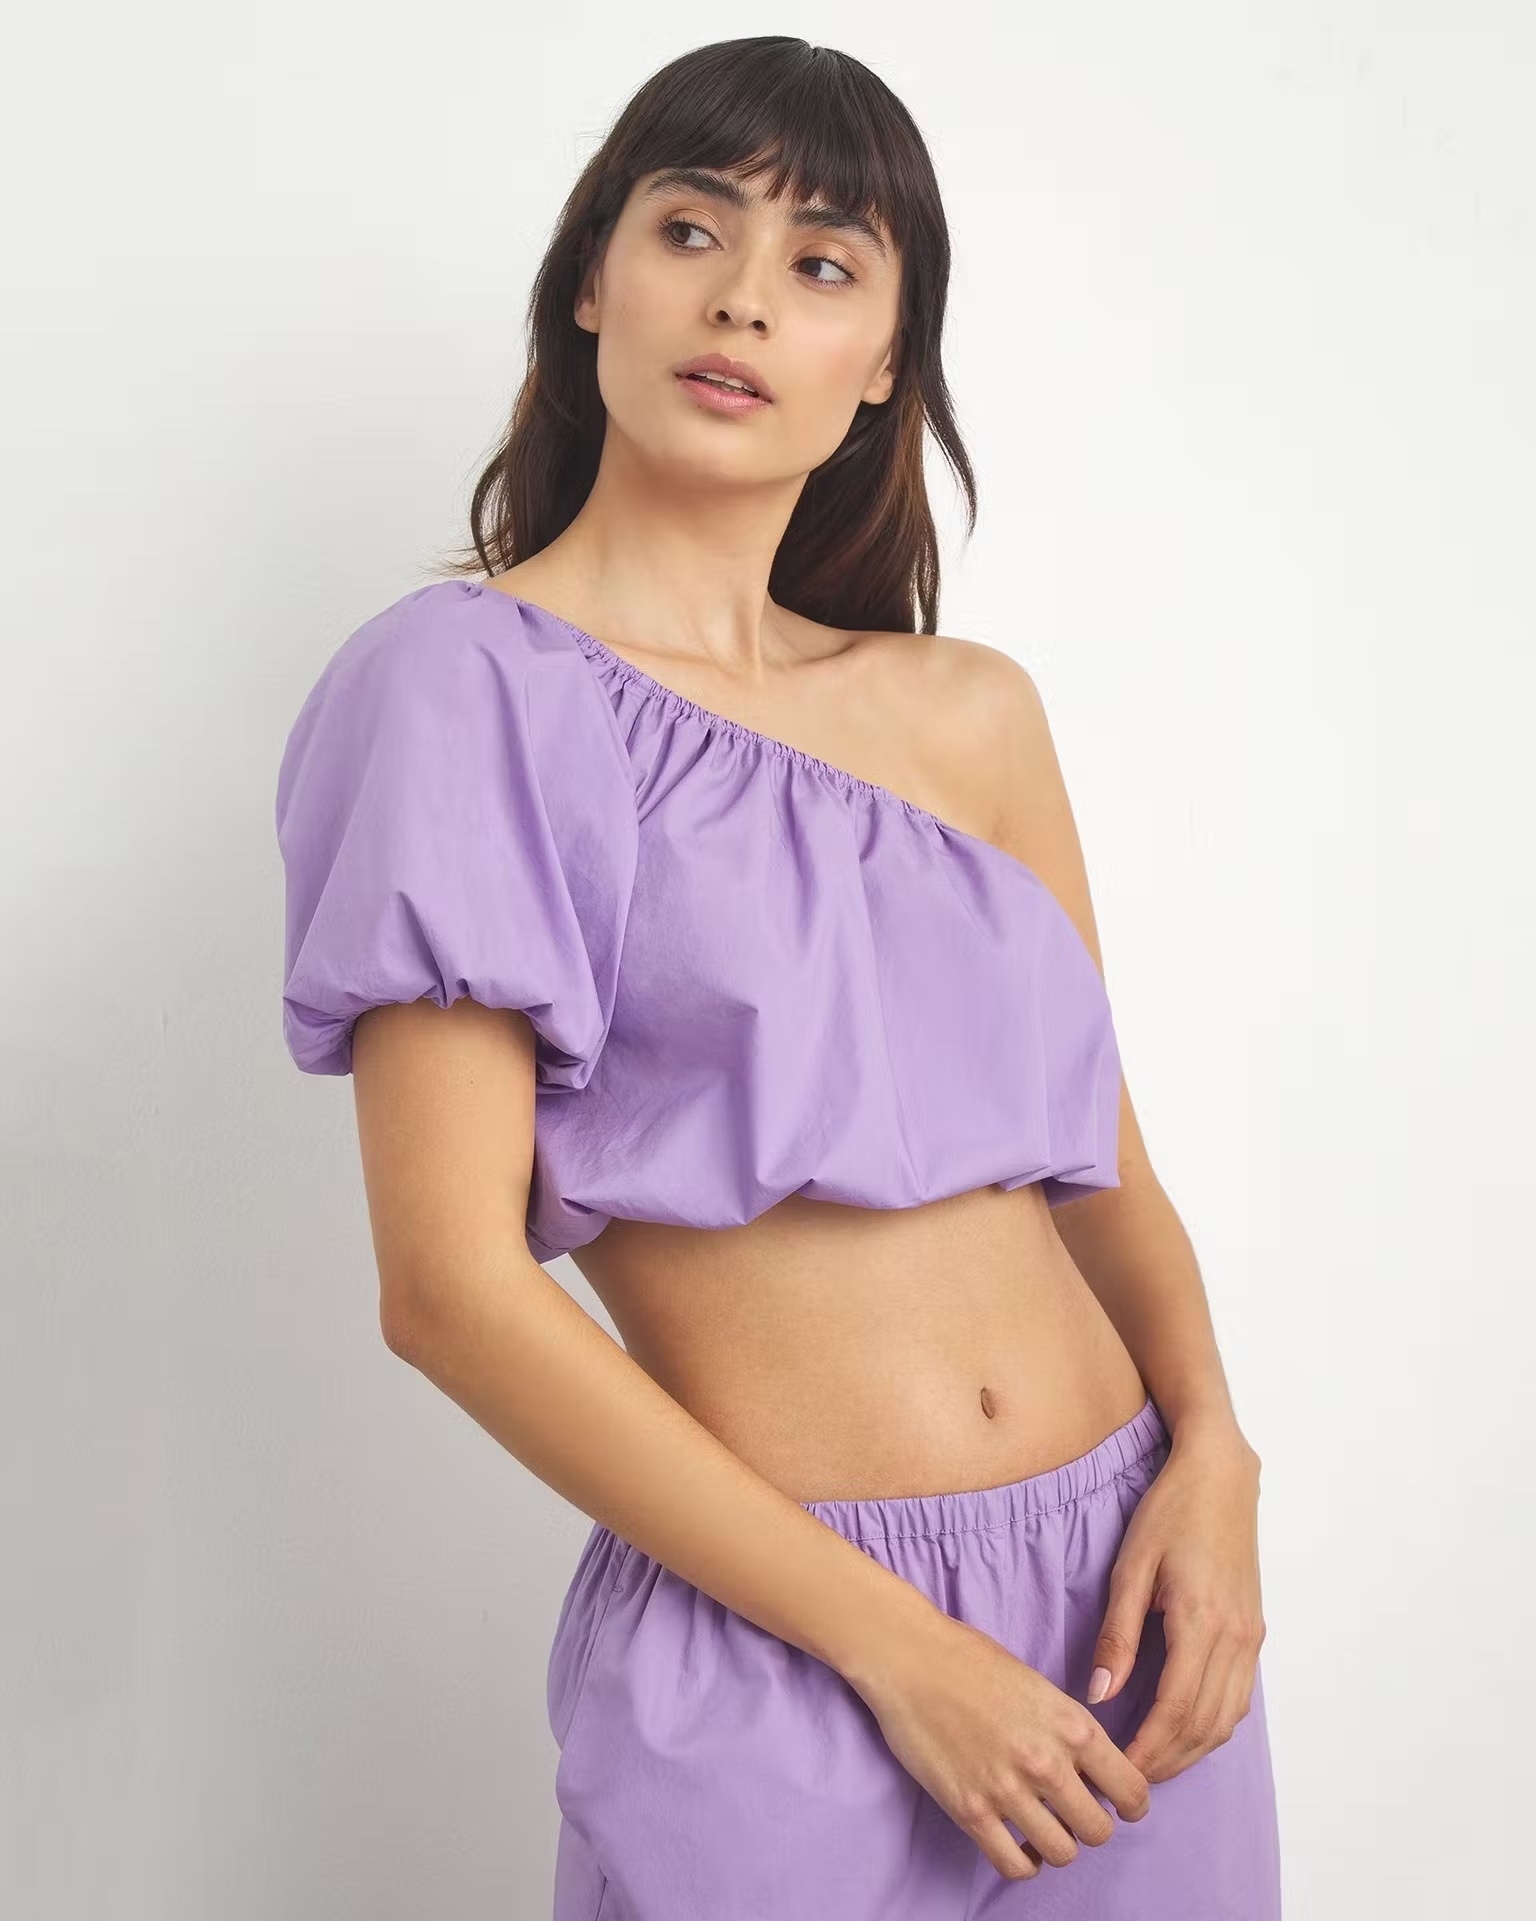 Model wearing purple top and pants